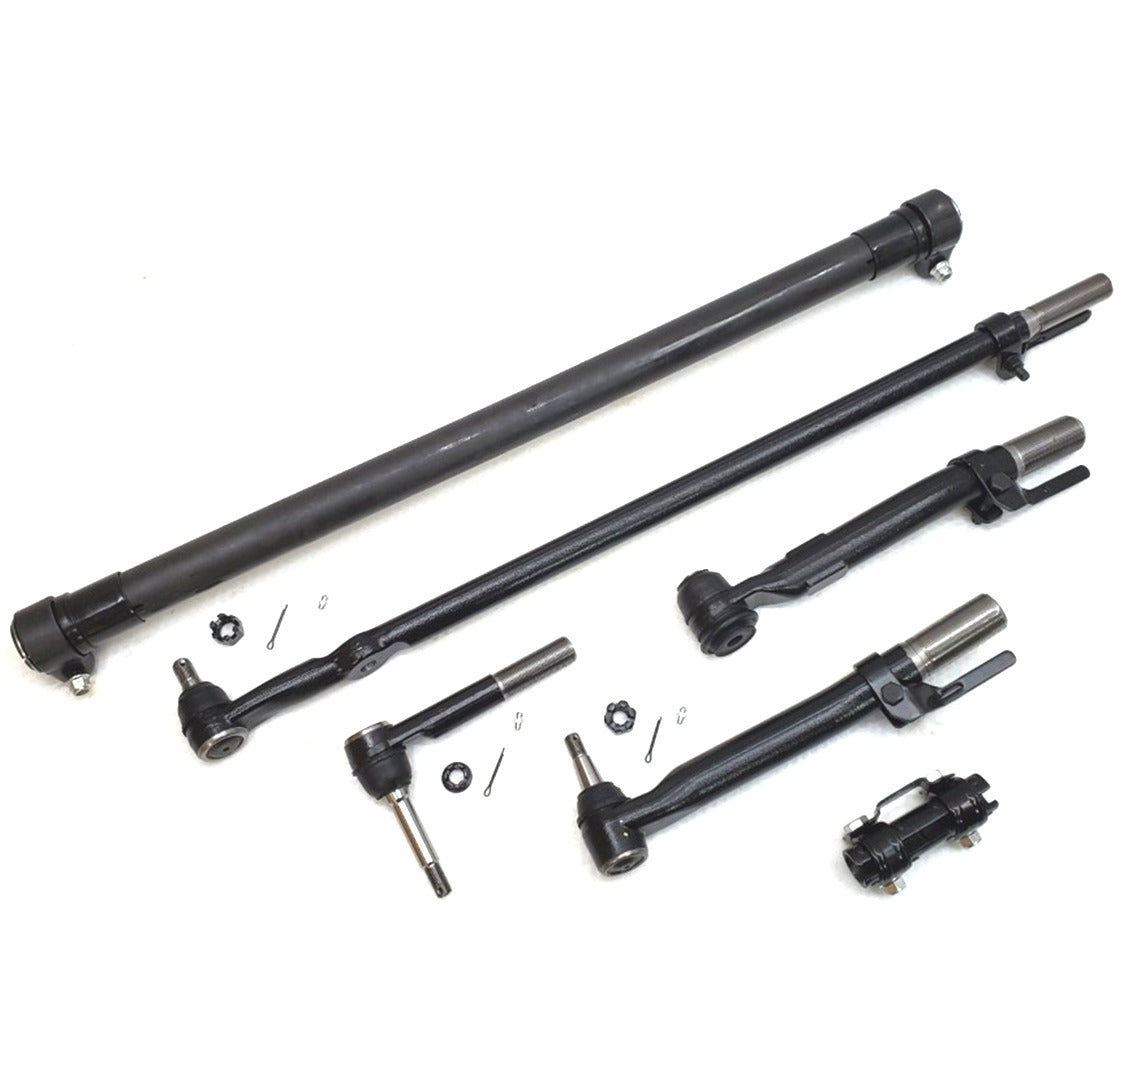 Lifetime Drag Link Tie Rod Sleeve Kit for 2011-2019 Ford F450, F550 Super Duty 4x4